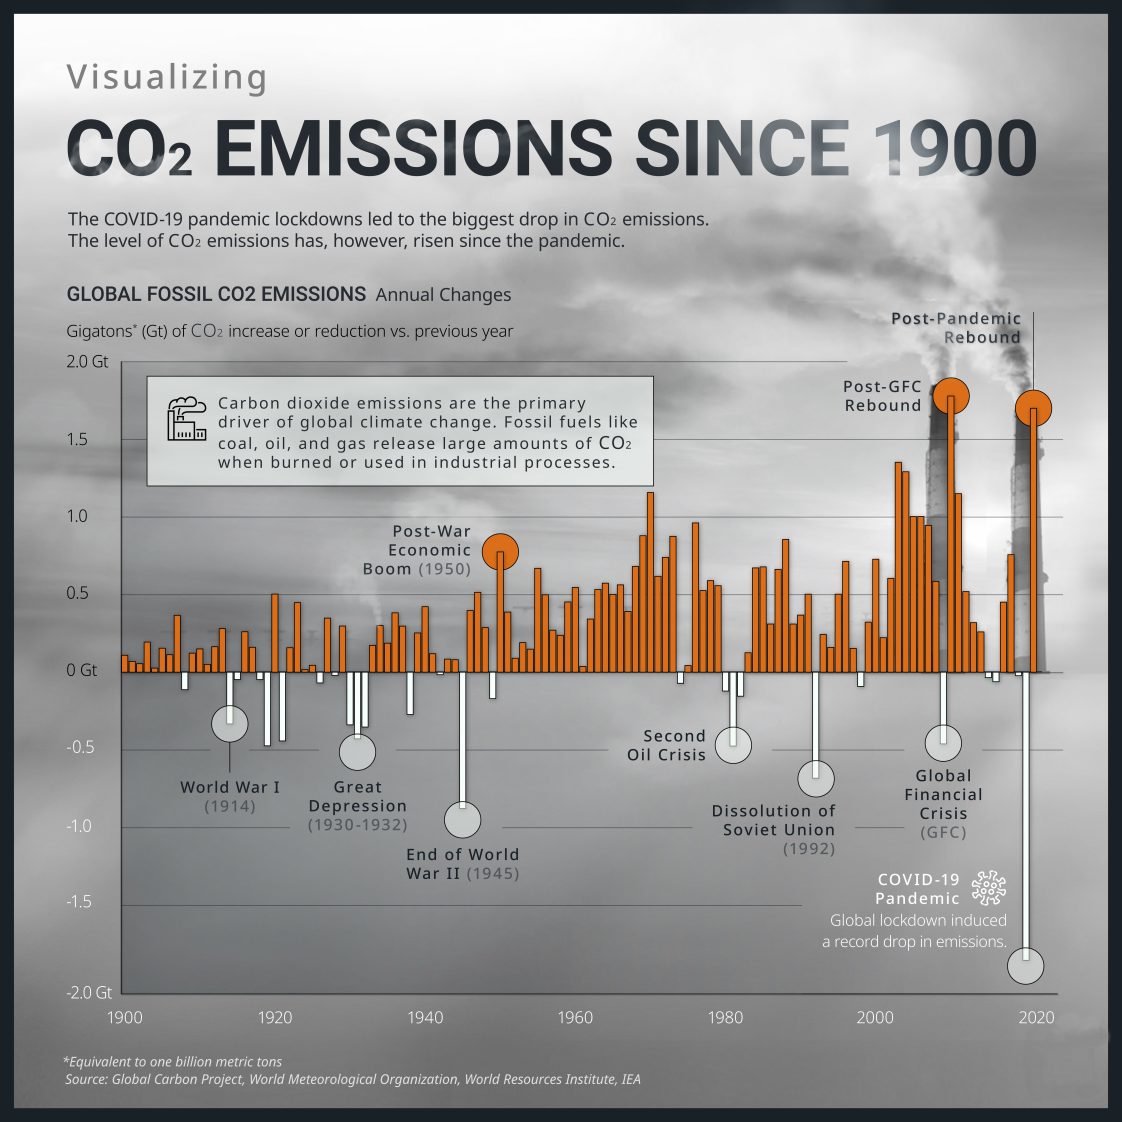 Figure 3. Global annual changes in fossil carbon dioxide emissions since 1900.